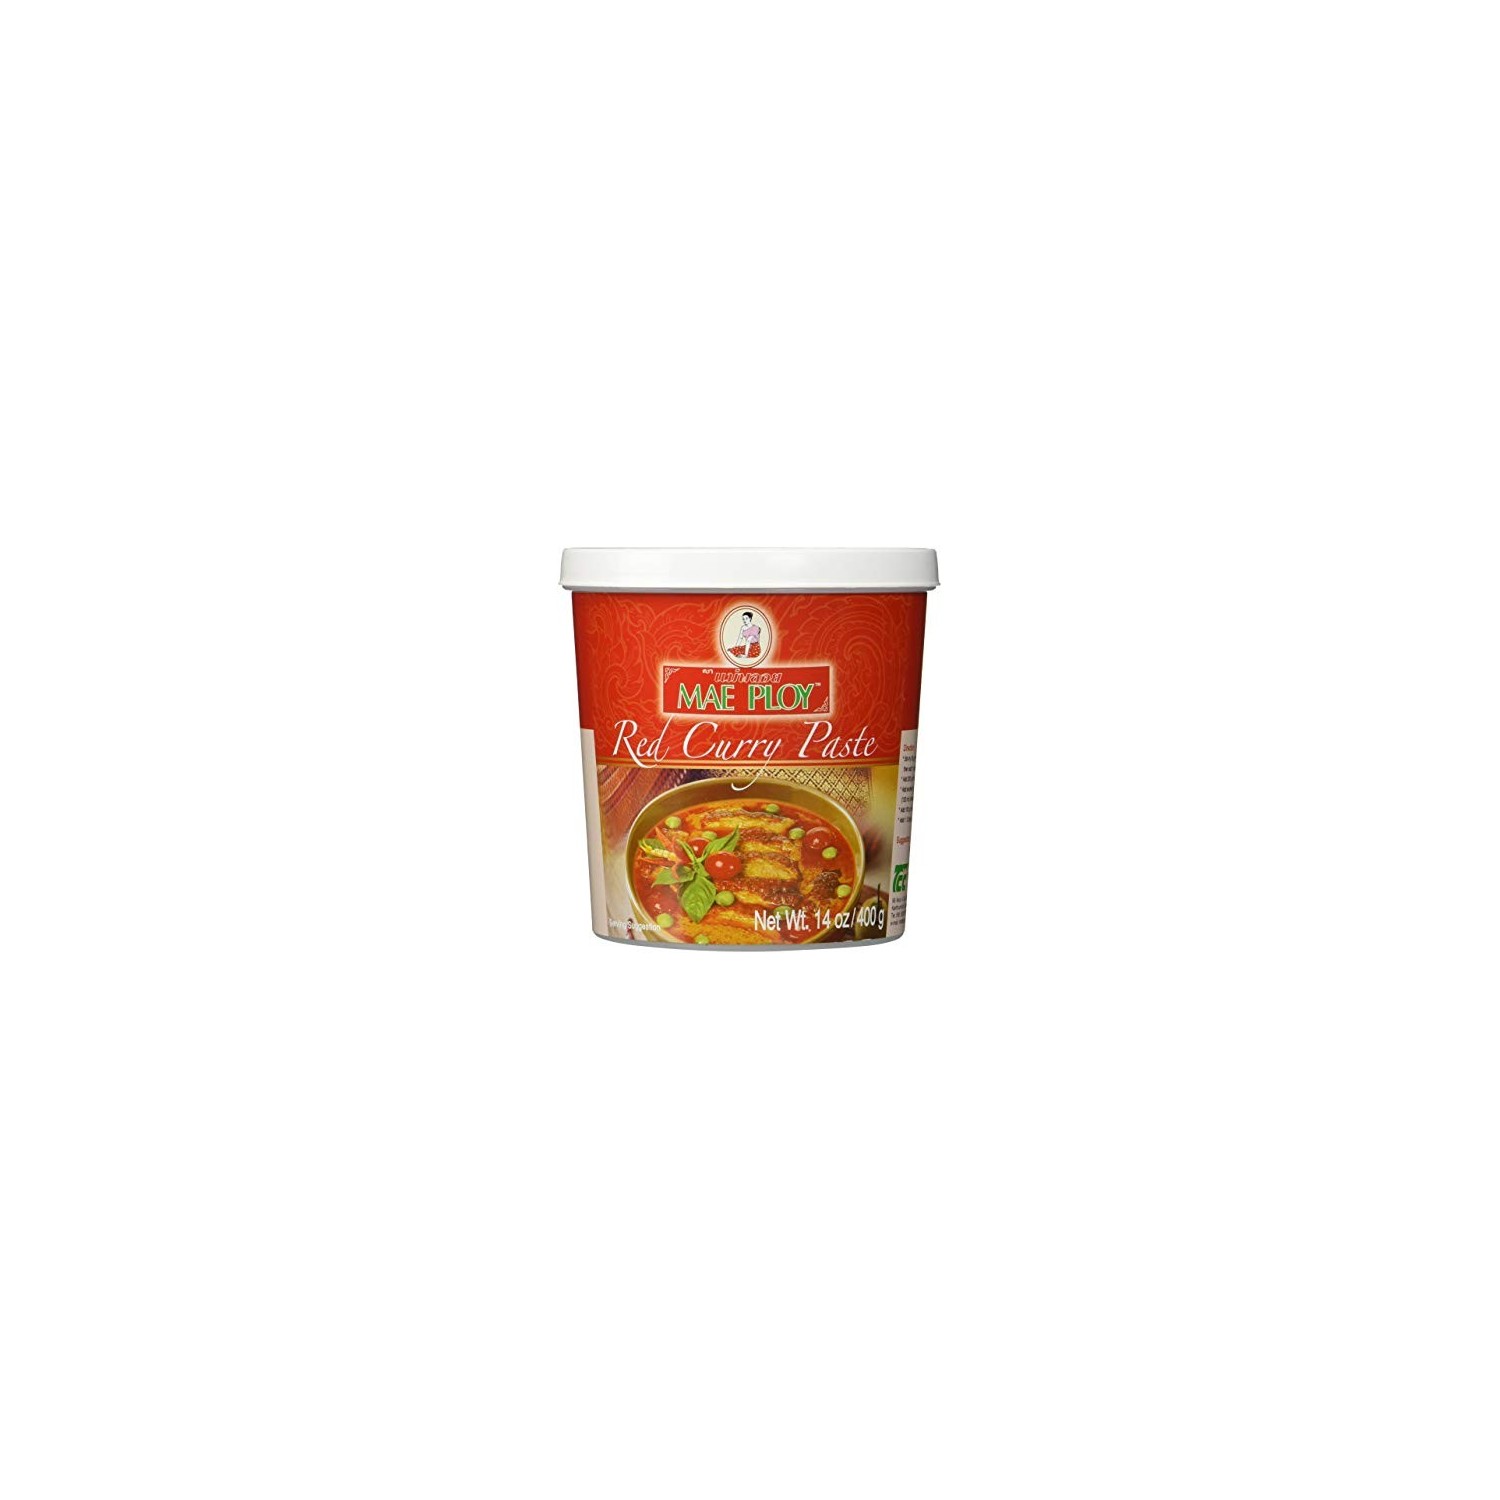 Mae Ploy Red Curry Paste 400g Red Curry Paste BBD 31/03/23 CLEARANCE SALE